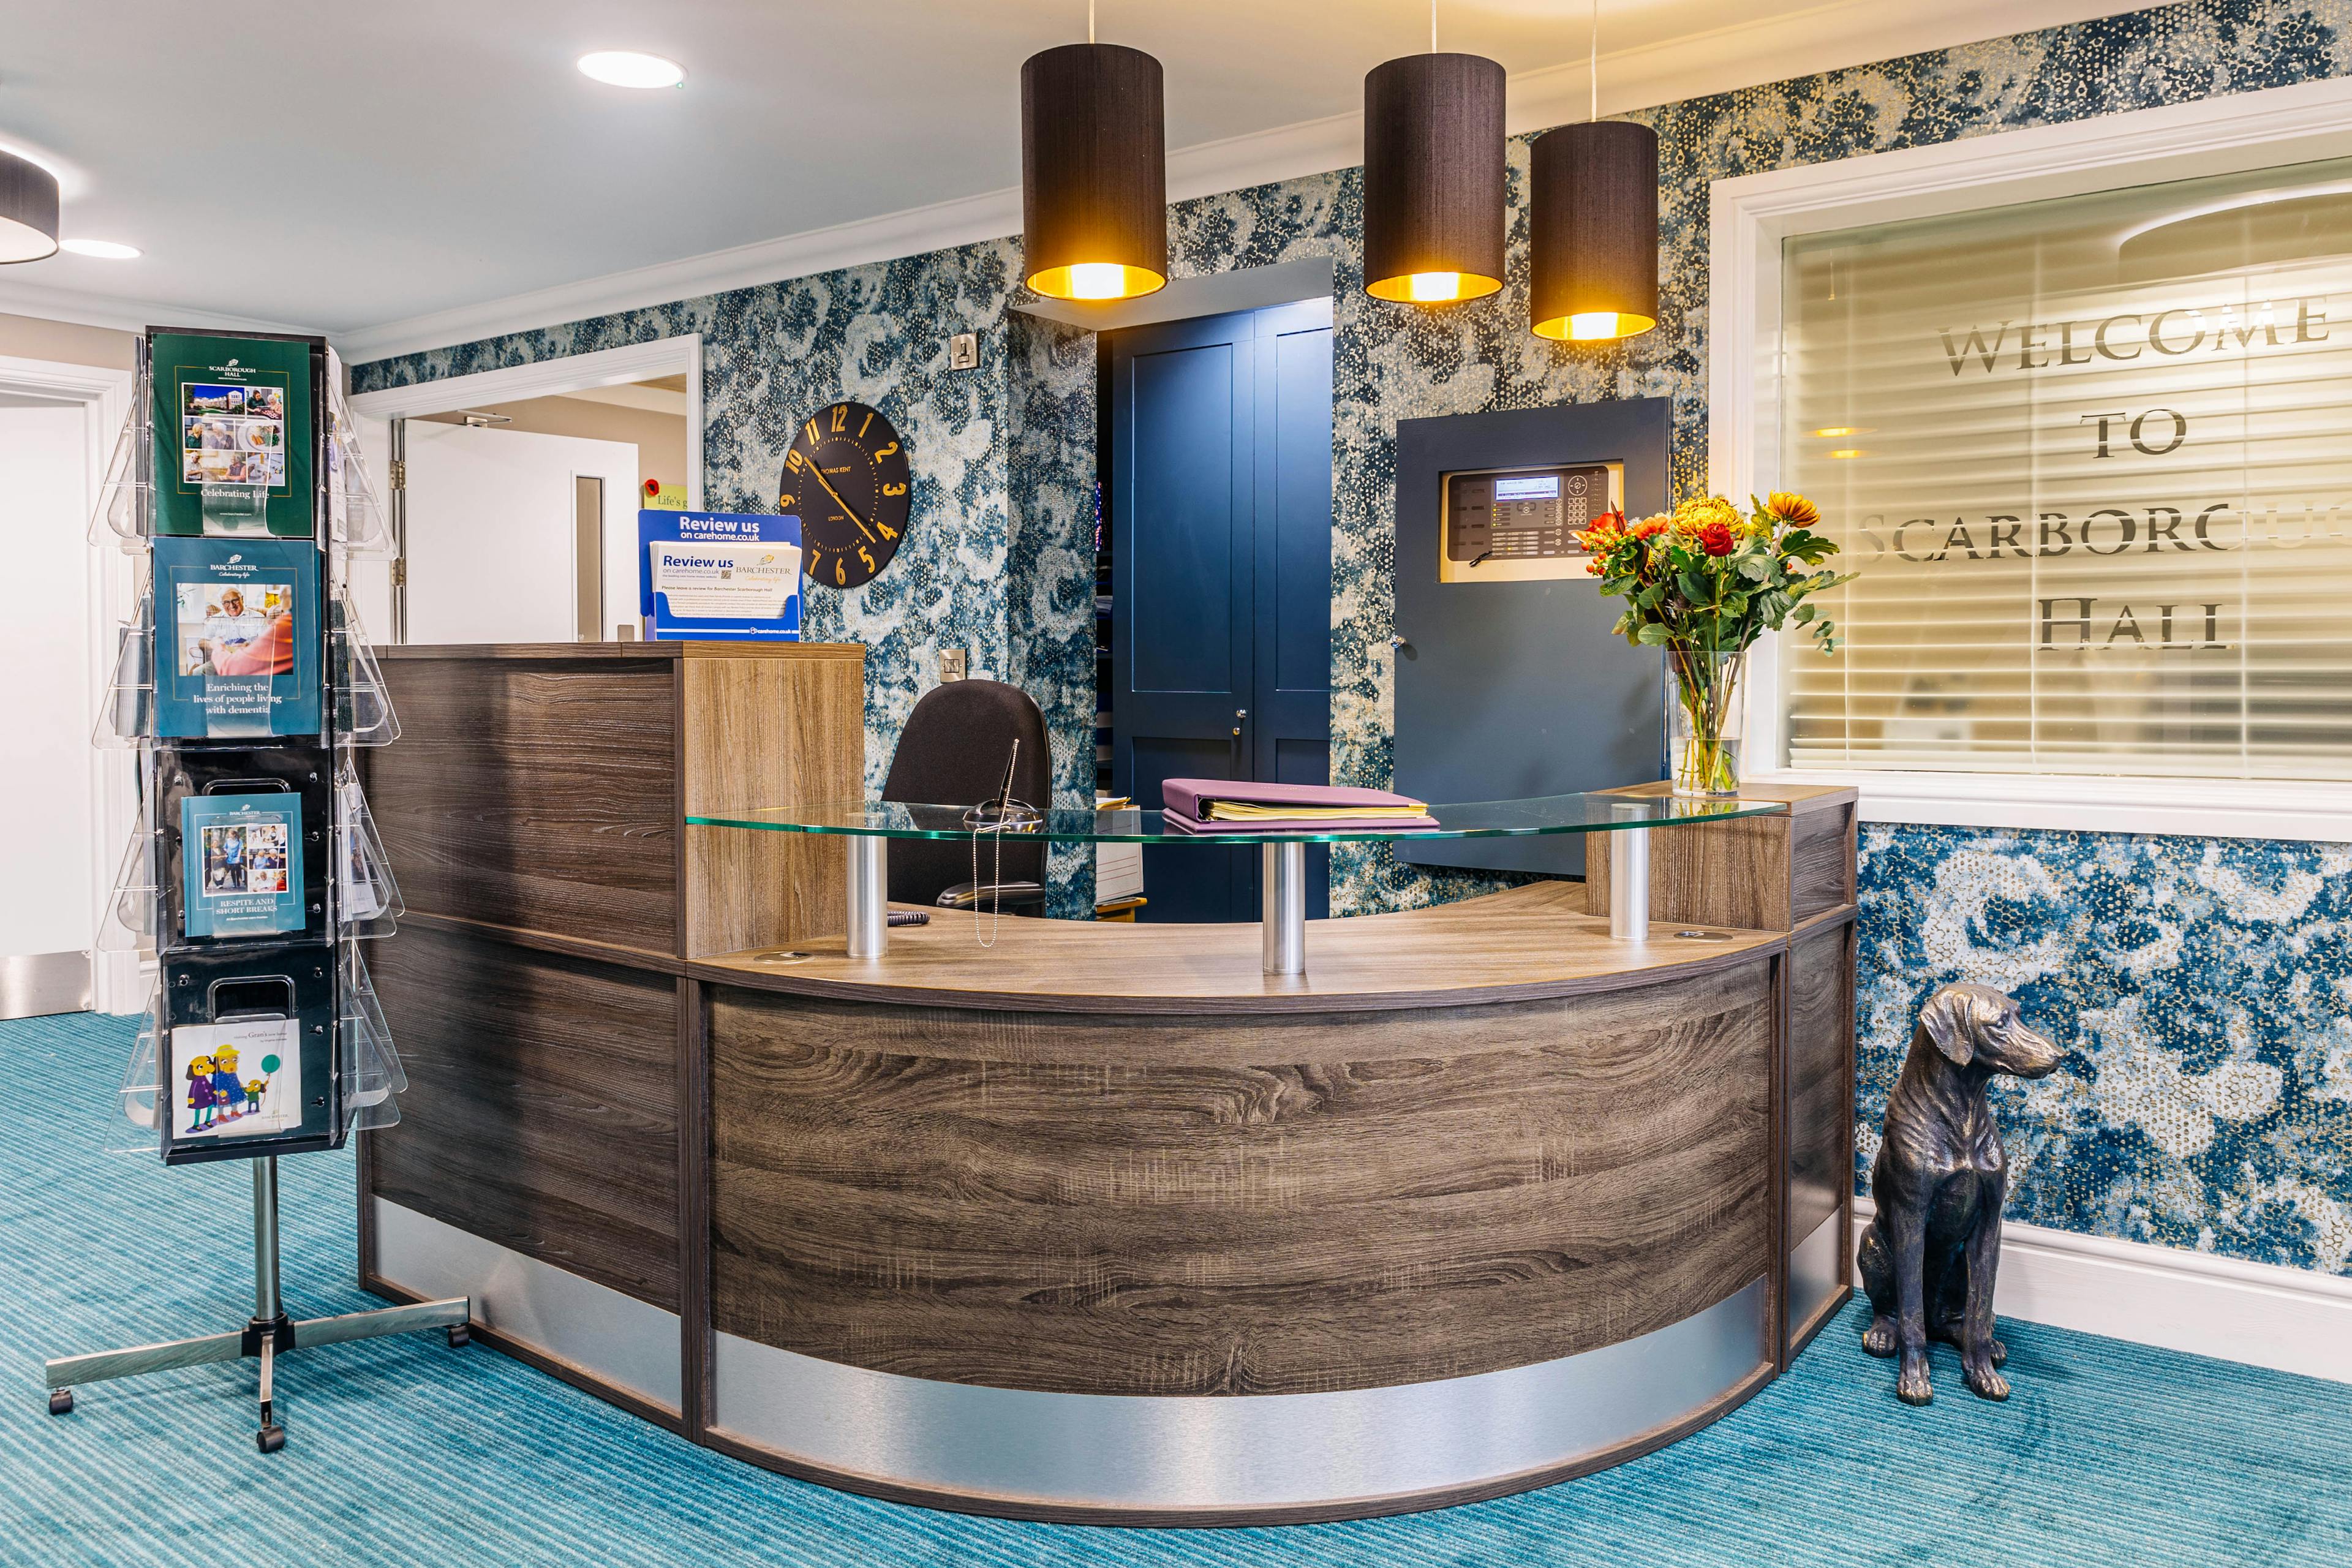 Reception at Scarborough Hall Care Home in Scarborough, North Yorkshire